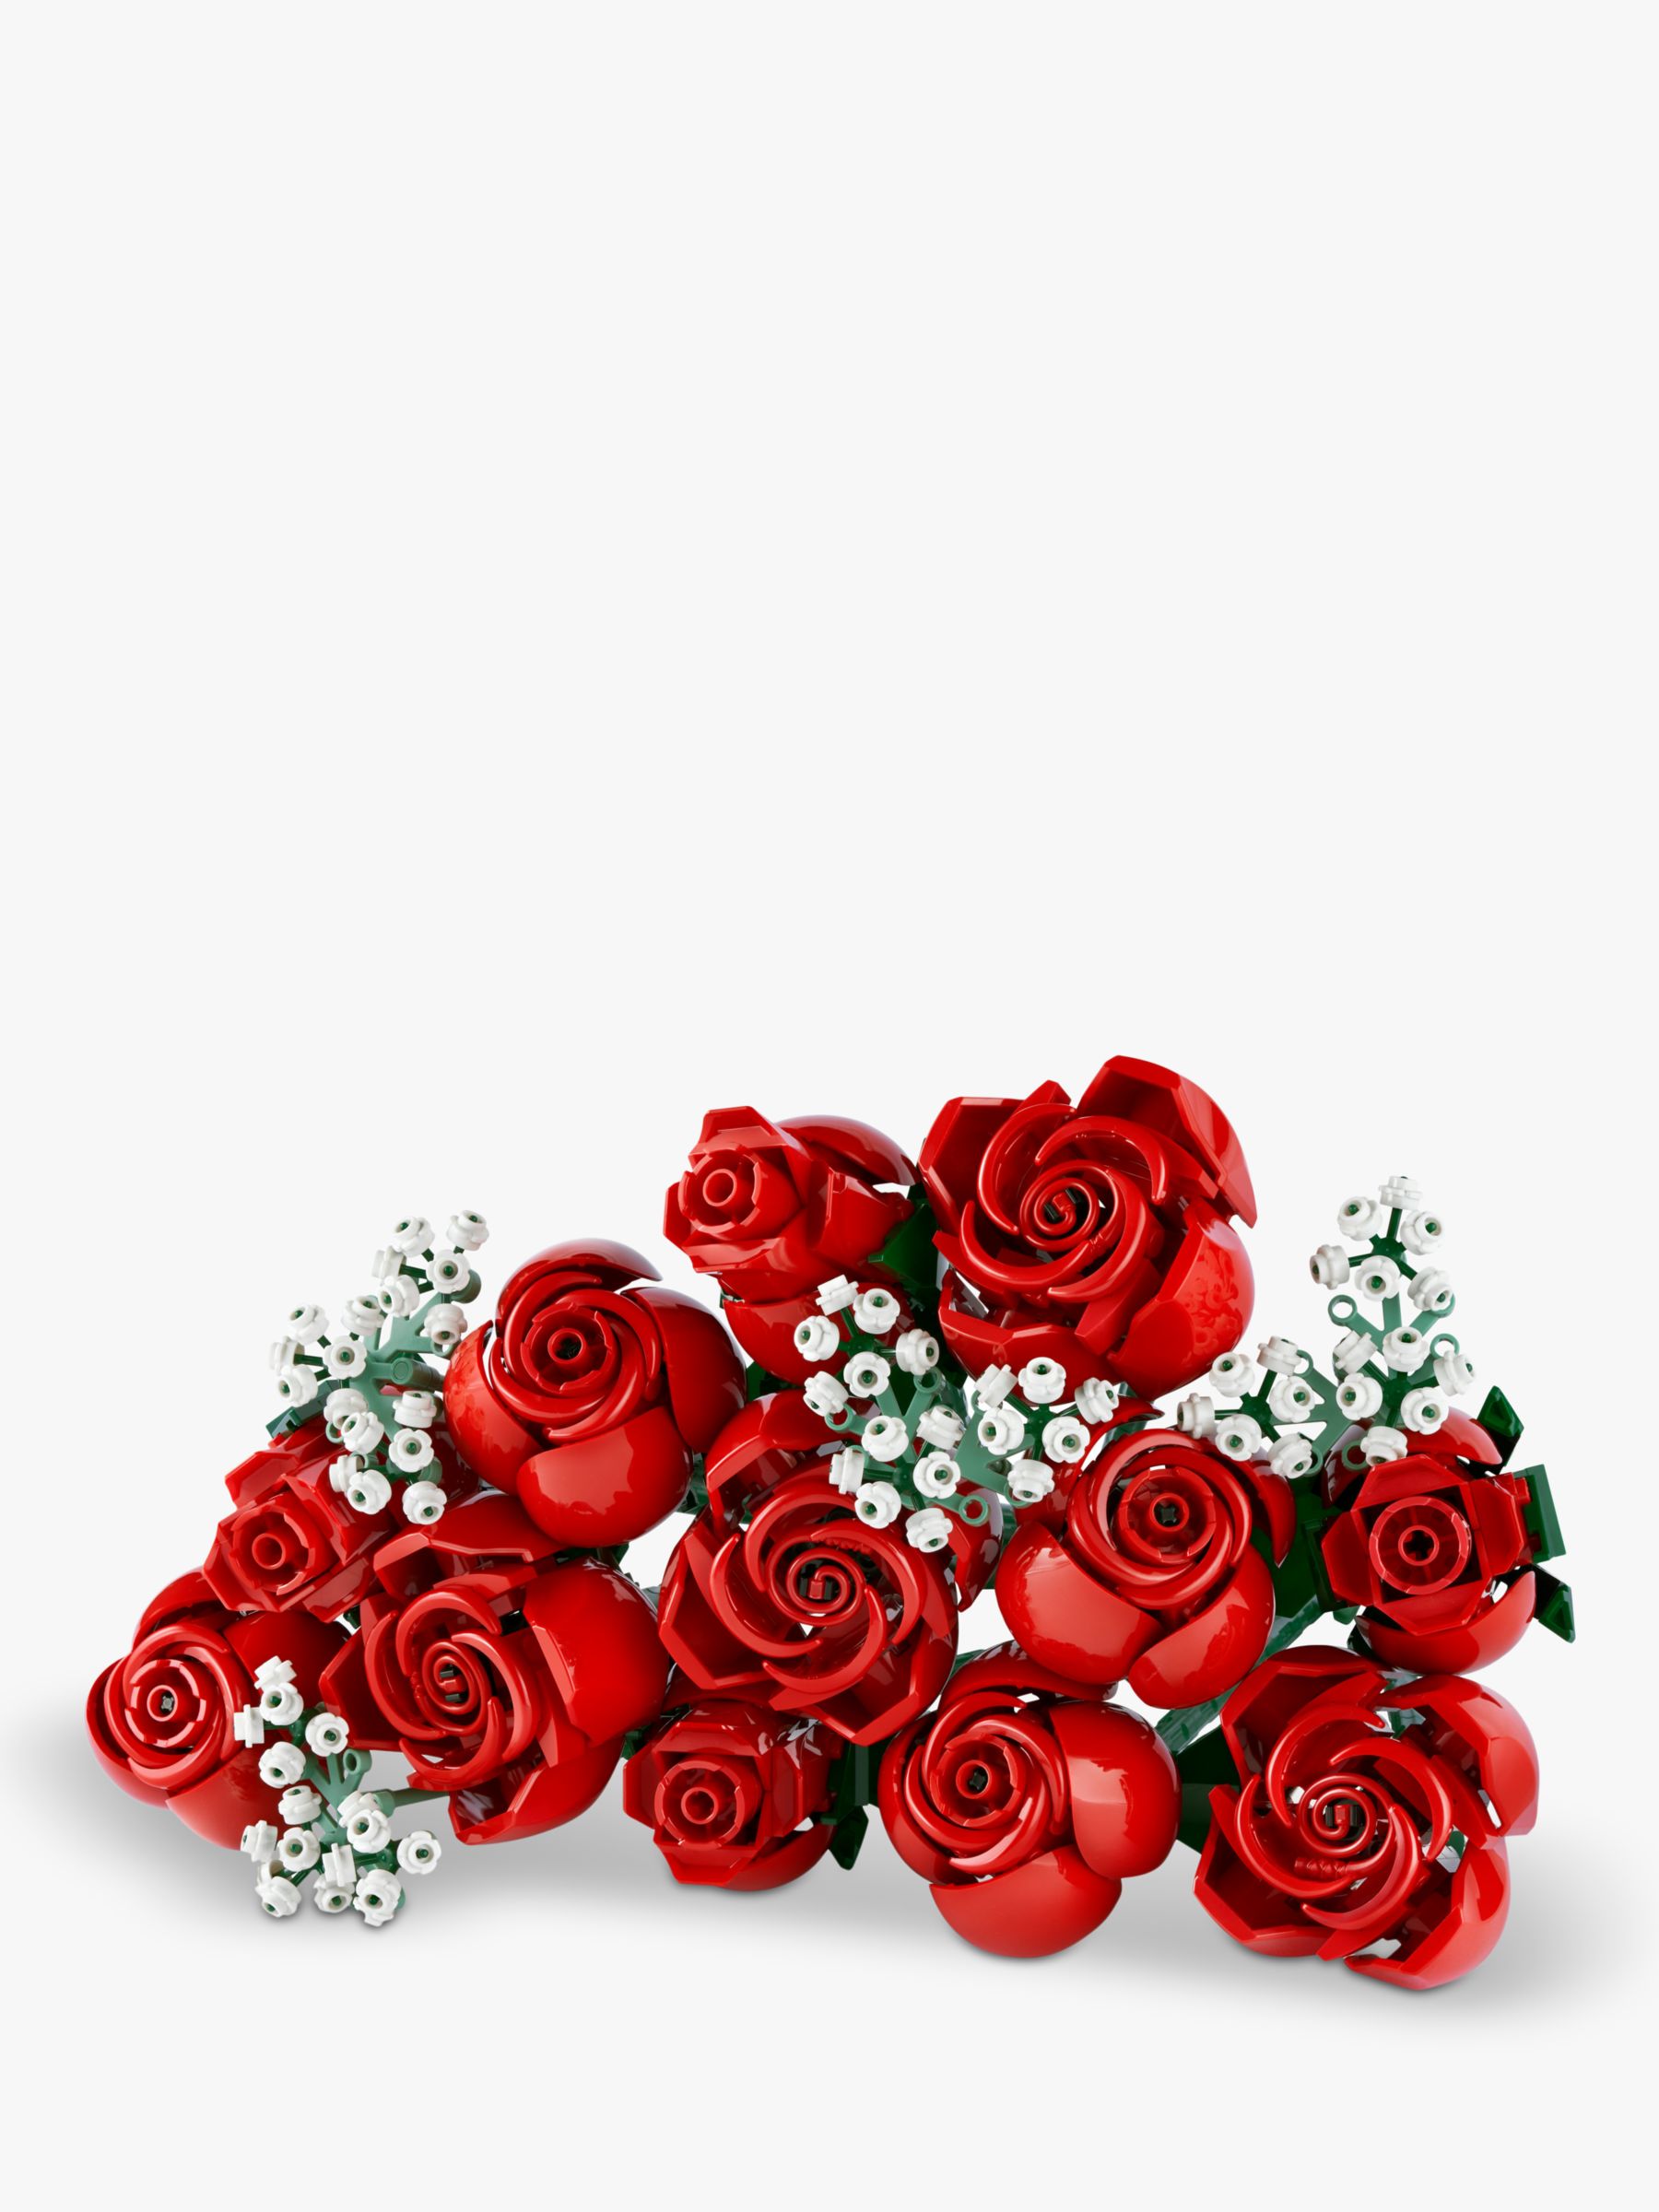 LEGO 10328 Bouquet of Roses review